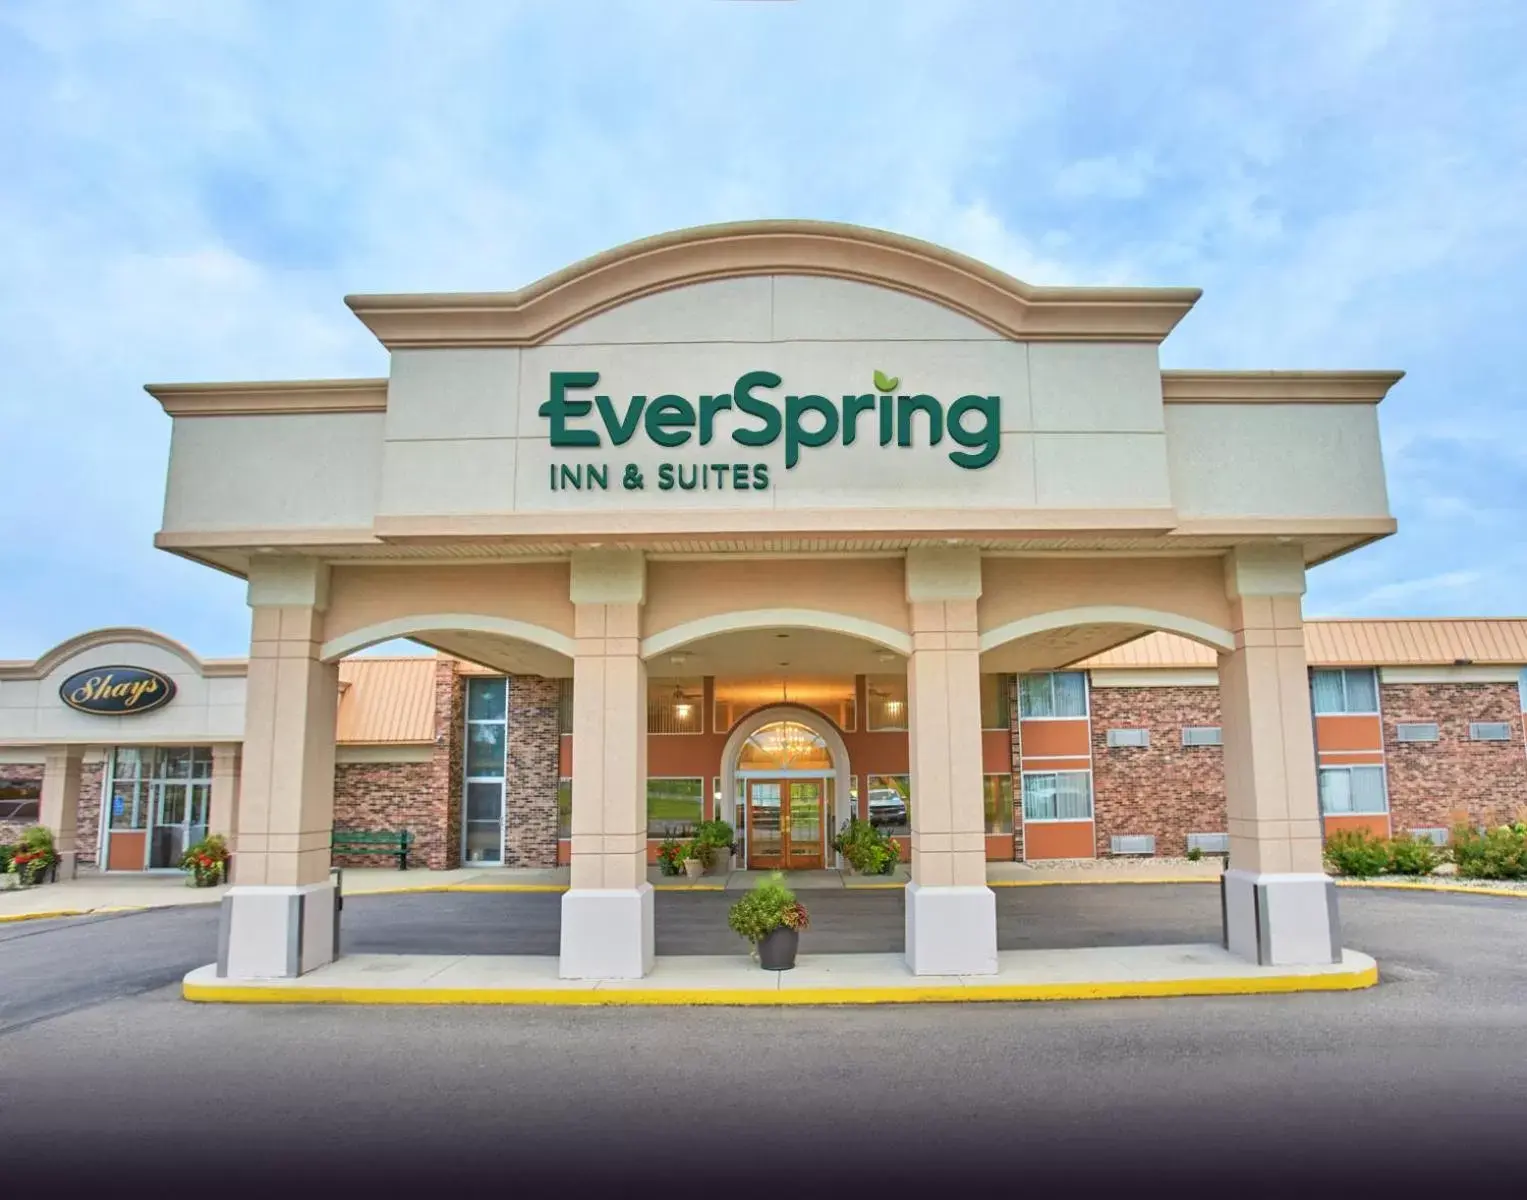 Facade/entrance in EverSpring Inn and Suites